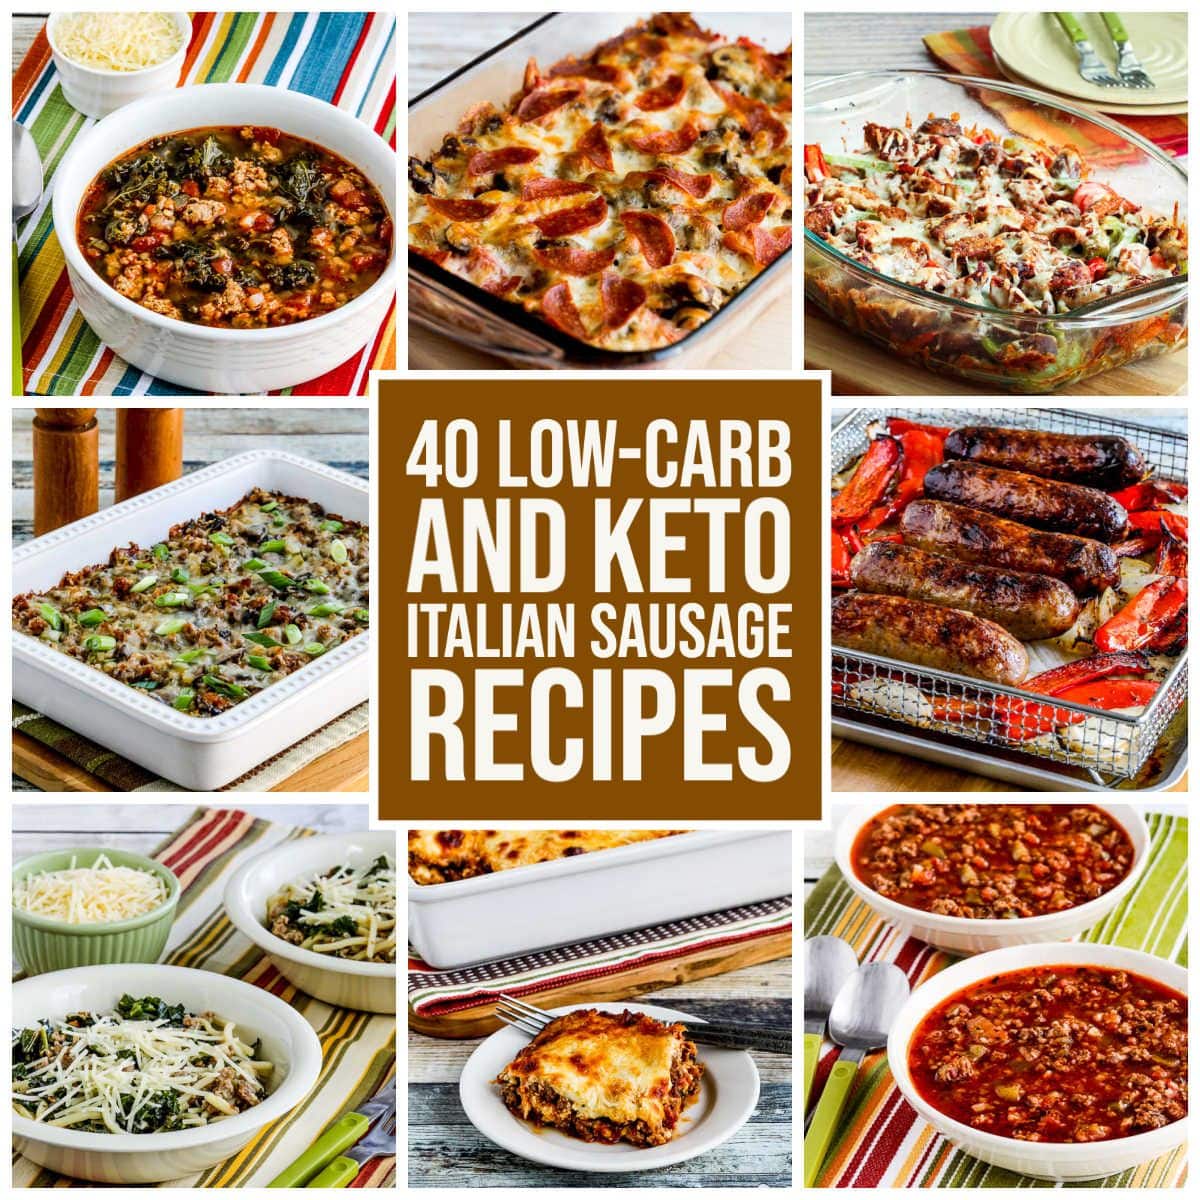 Collage of 40 low carb and keto Italian sausage recipes featured with text overlay